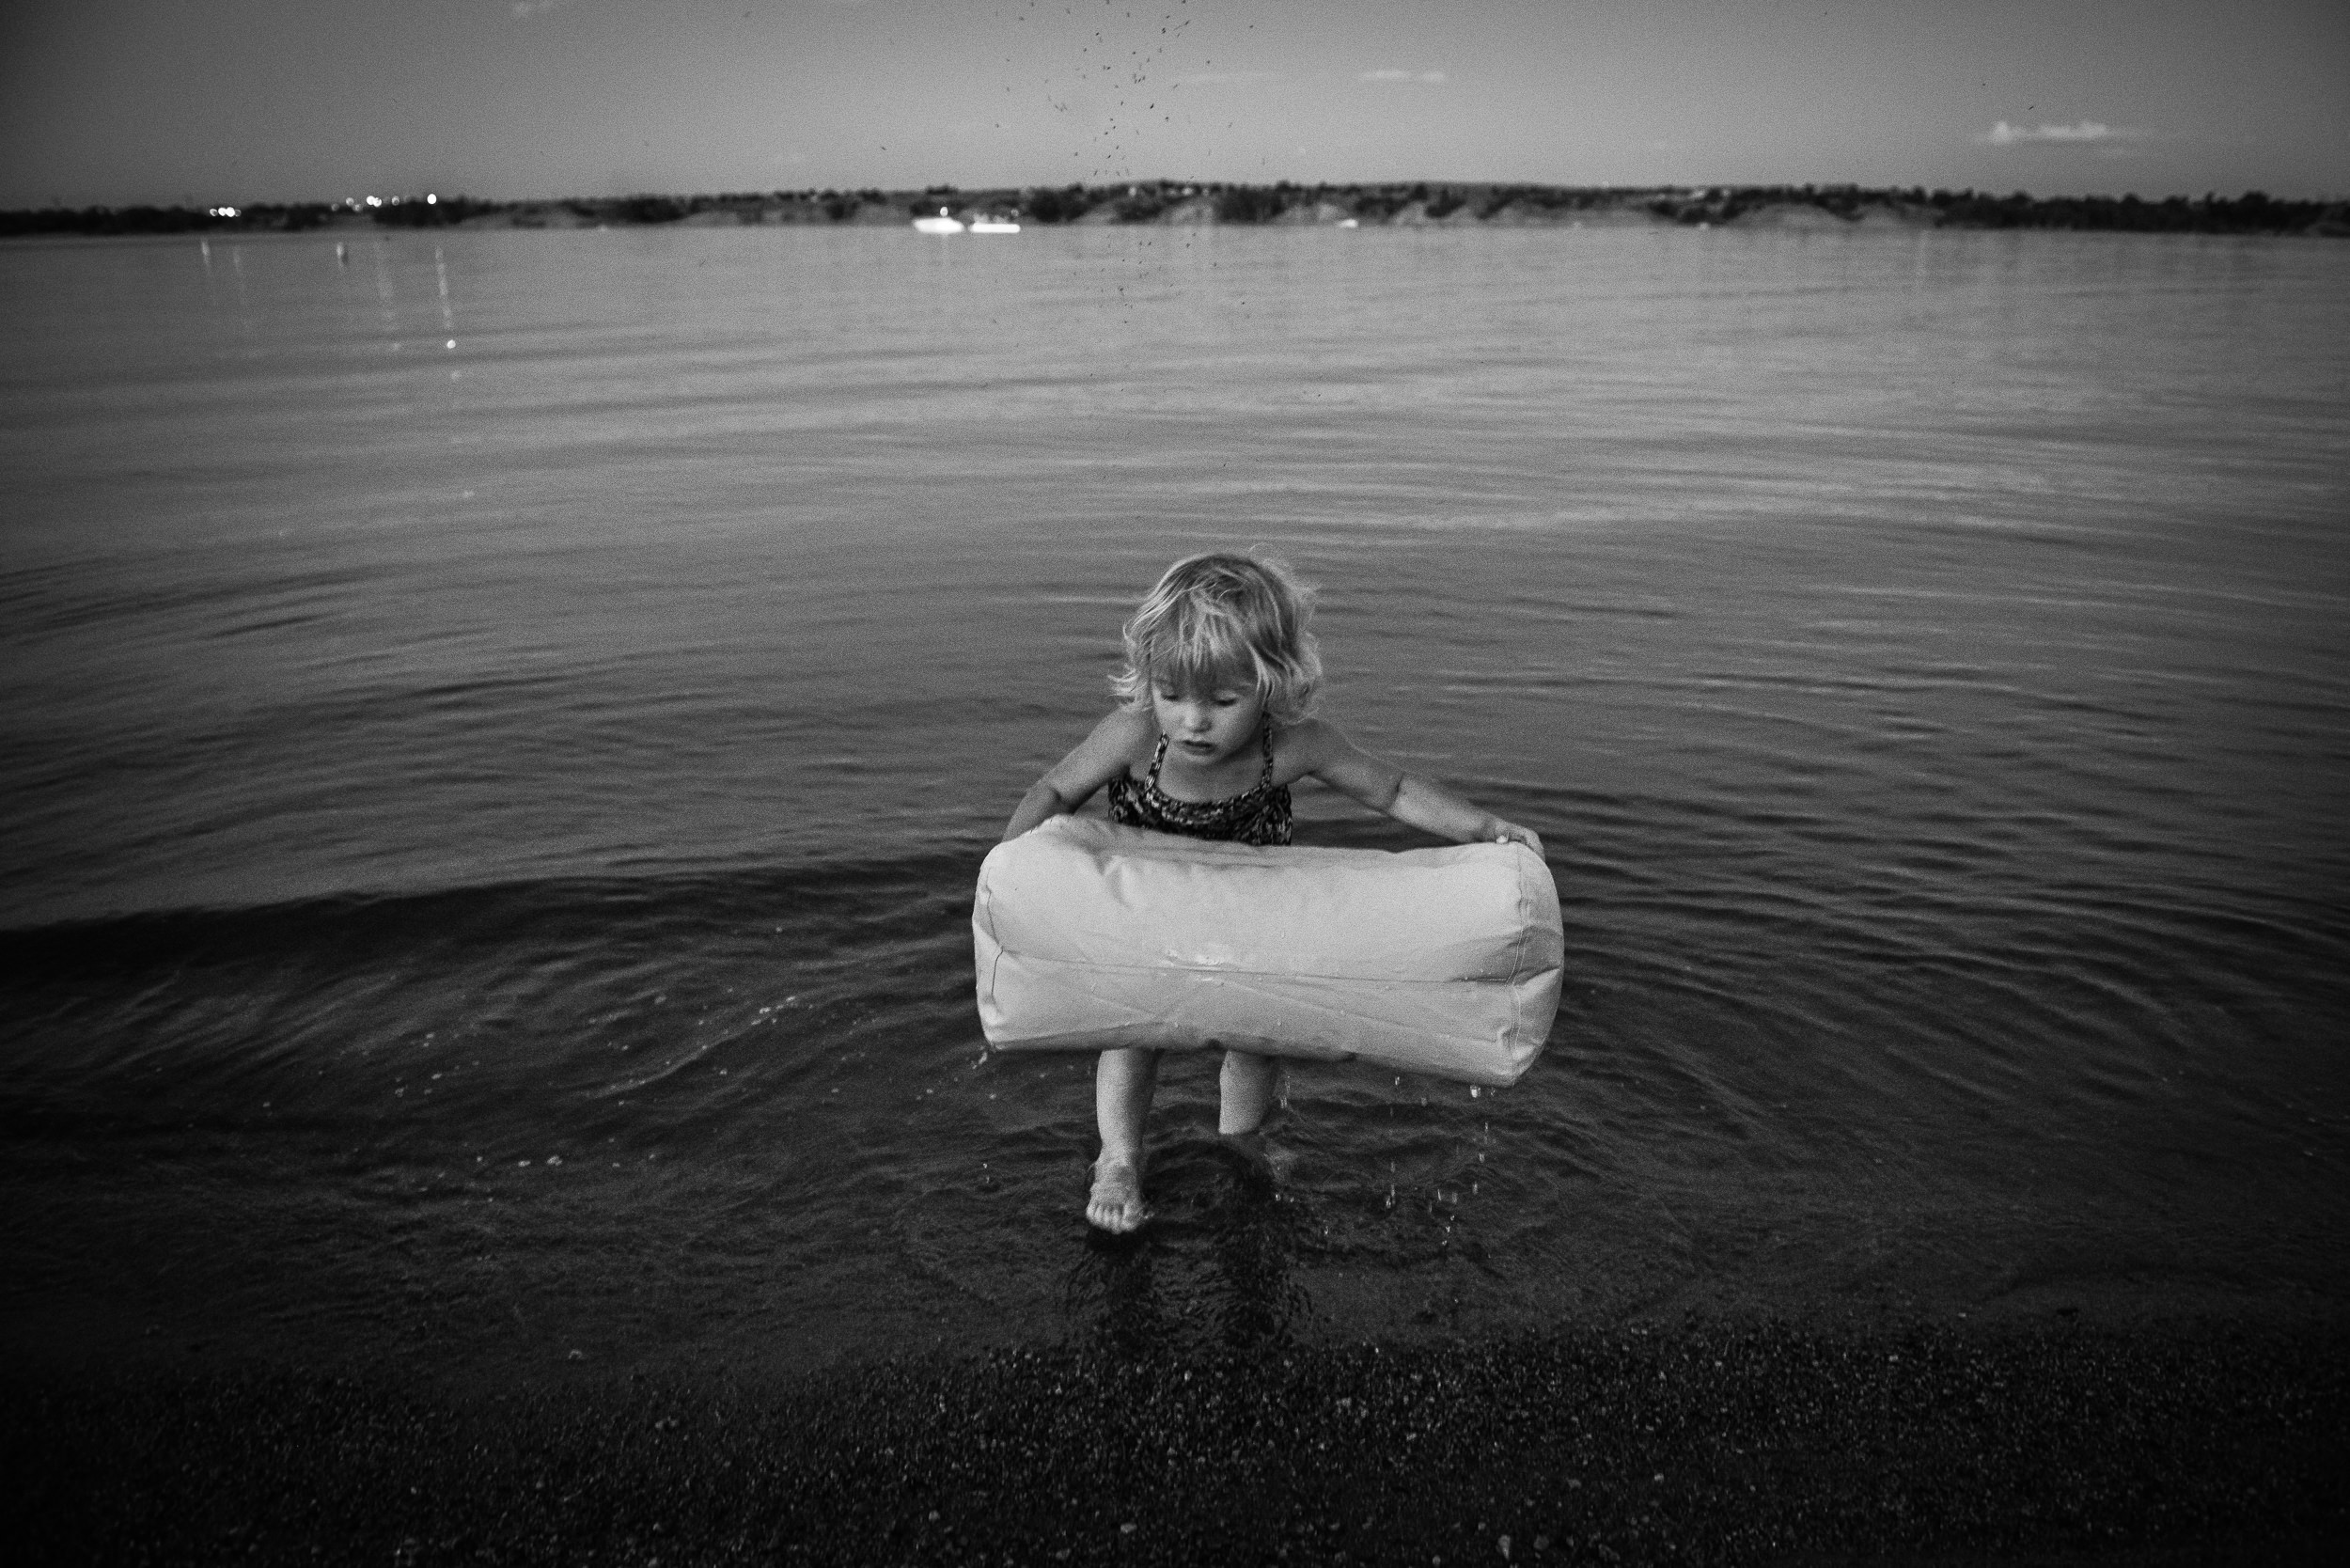 Blog - The Pen & Camera - Molly Rees Photo - Black and White Documentary Childhood Photography - girl at night in water at Chatfield Reservoir in Denver, Colorado by M. Menschel